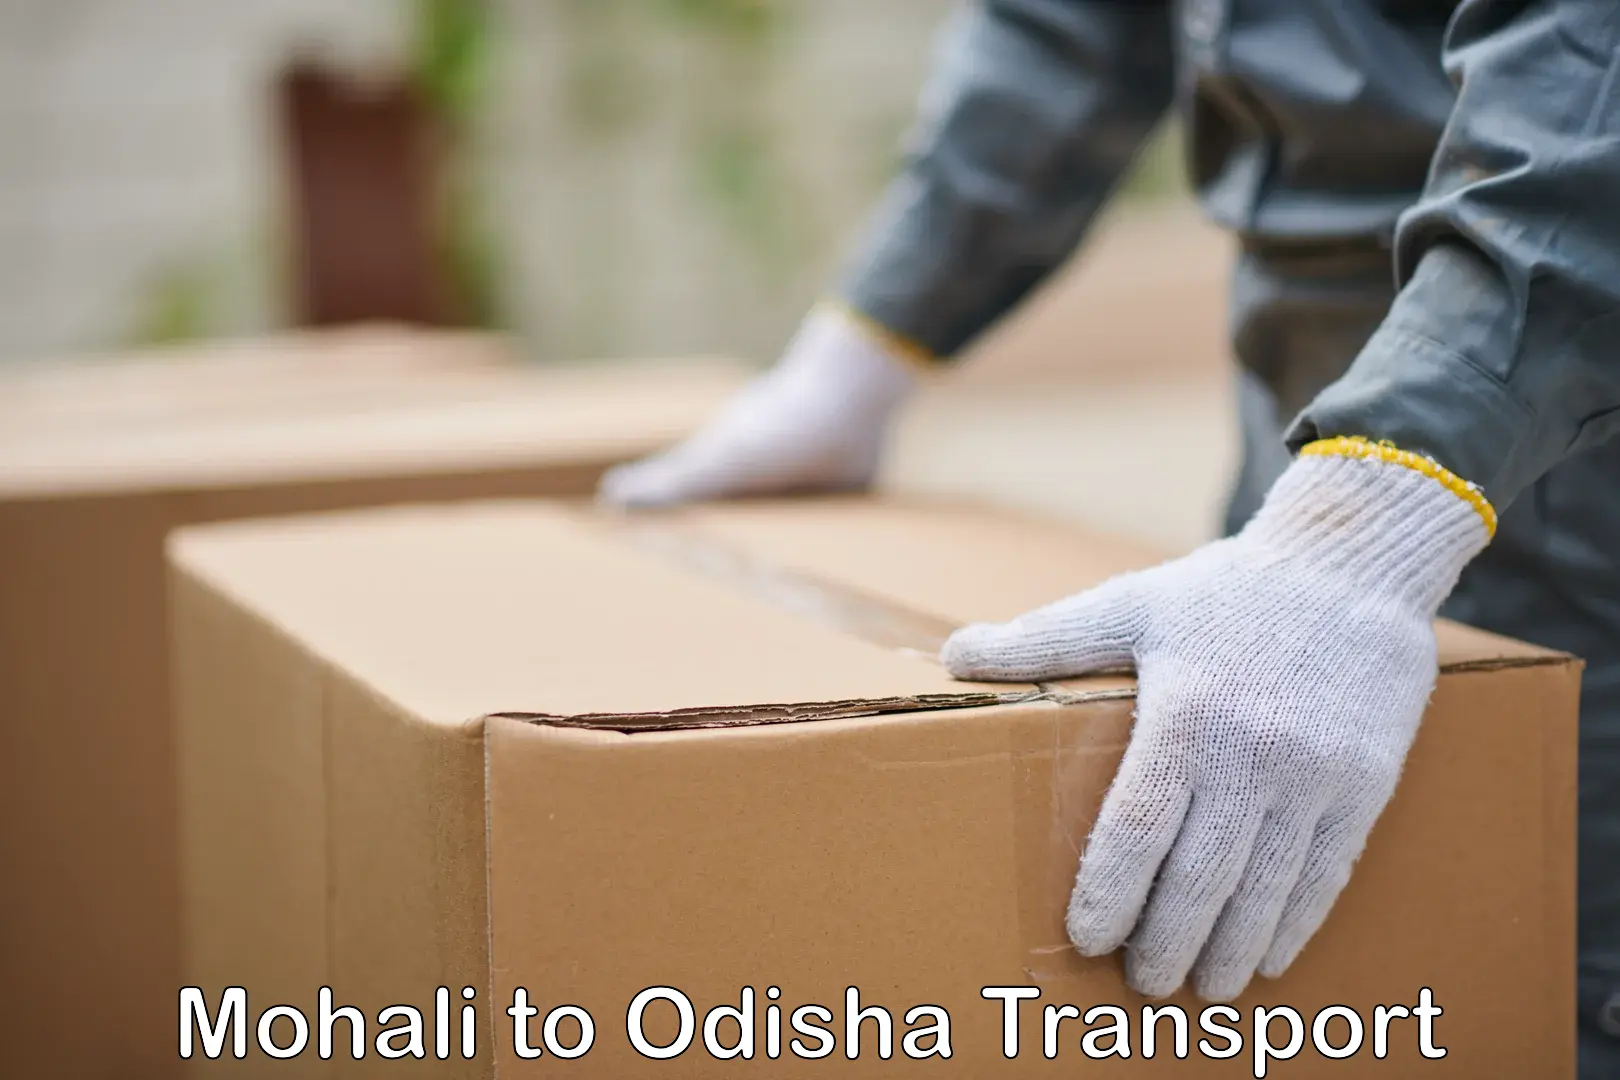 Container transport service Mohali to Odisha